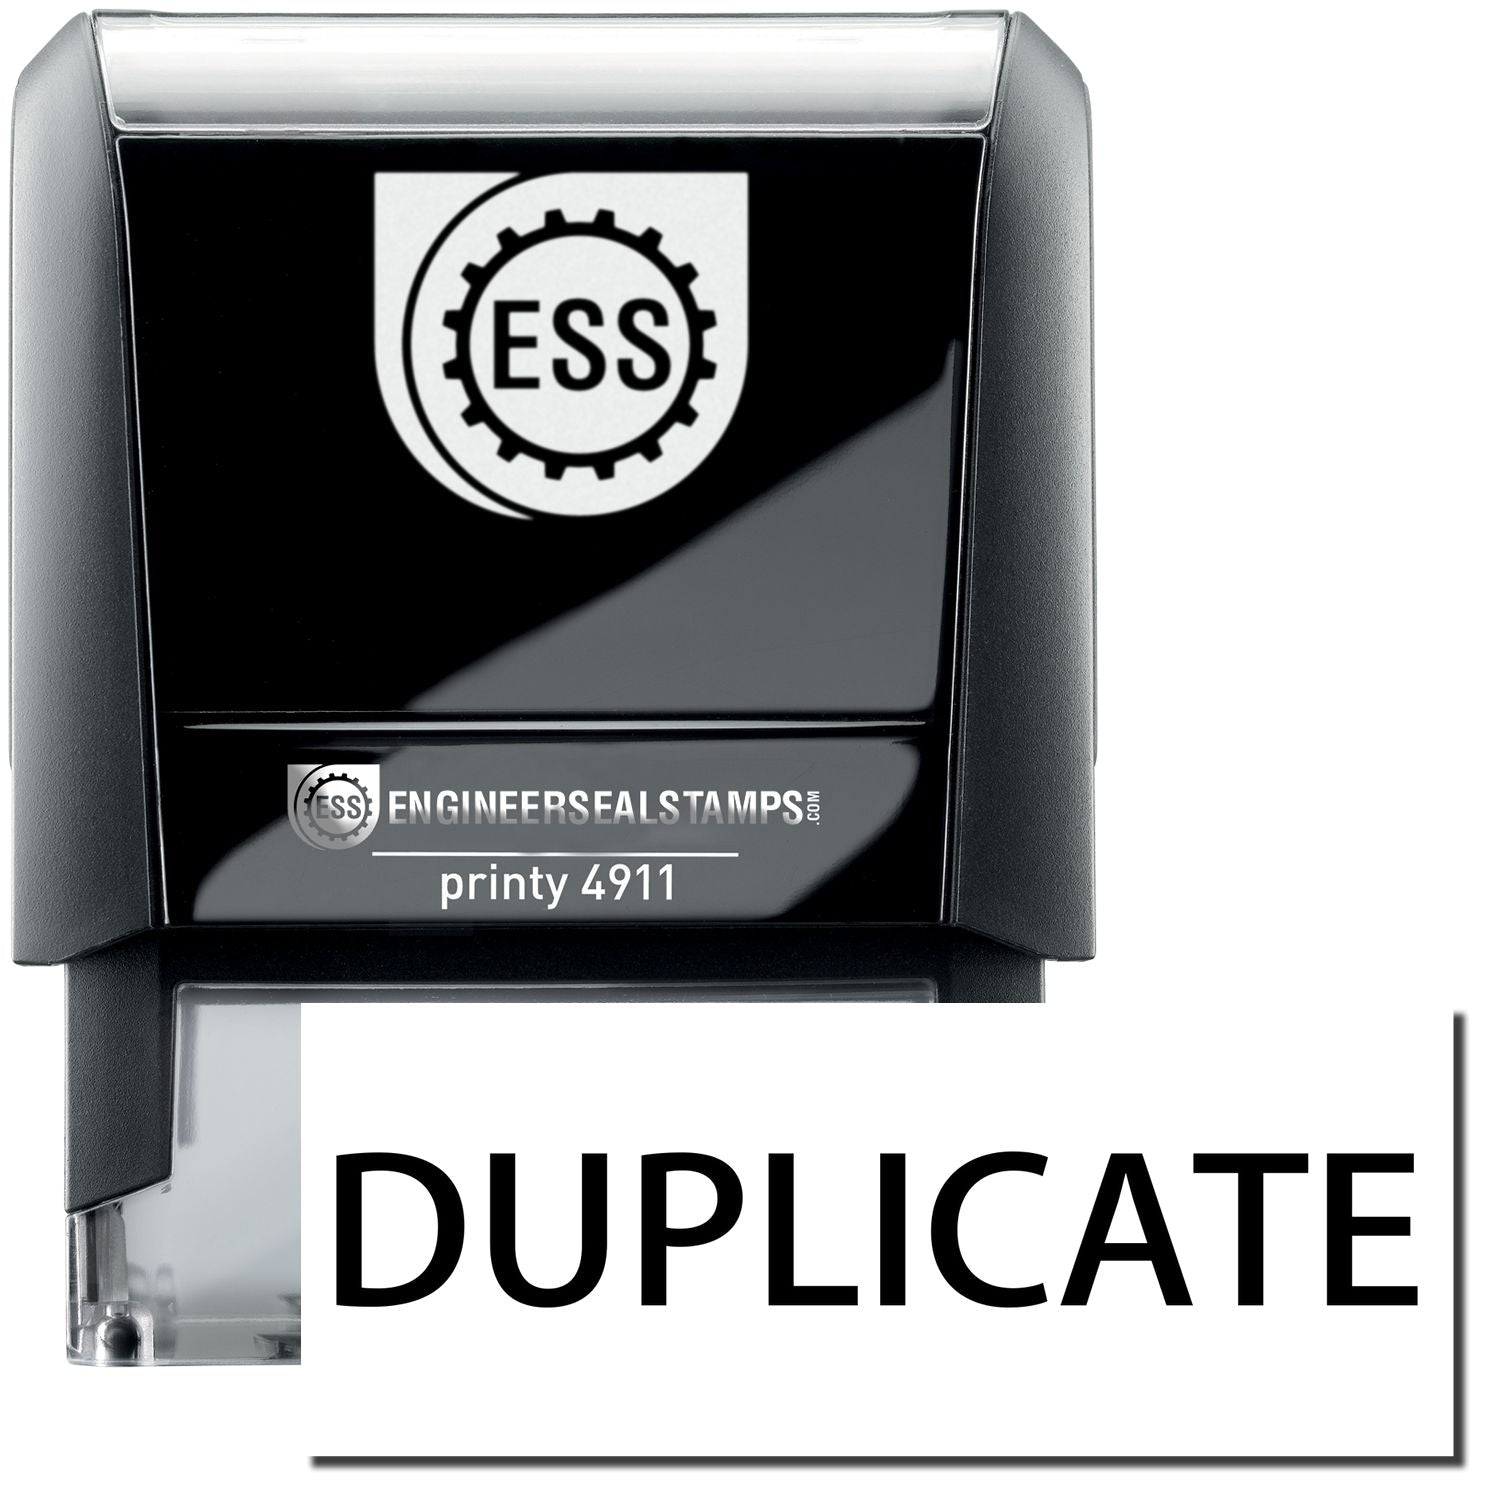 A self-inking stamp with a stamped image showing how the text "DUPLICATE" is displayed after stamping.